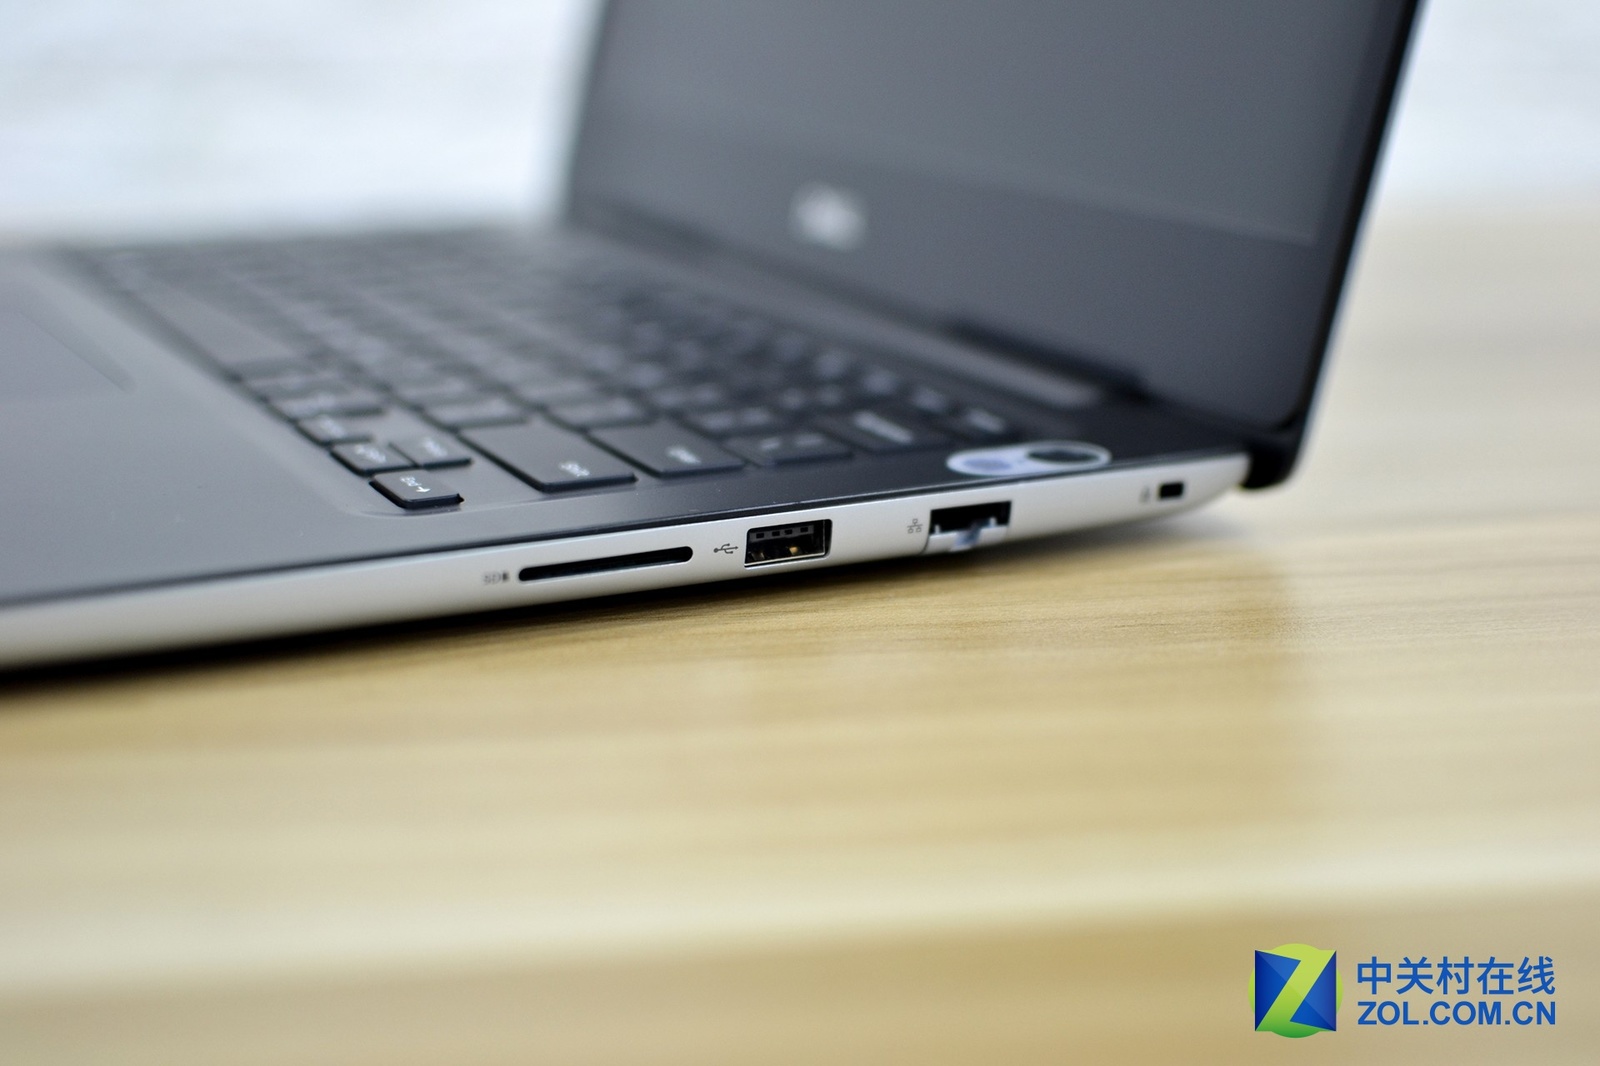 Dell Vostro 5481 laptop review - Dell, , Ultrabook, Notebook, Longpost